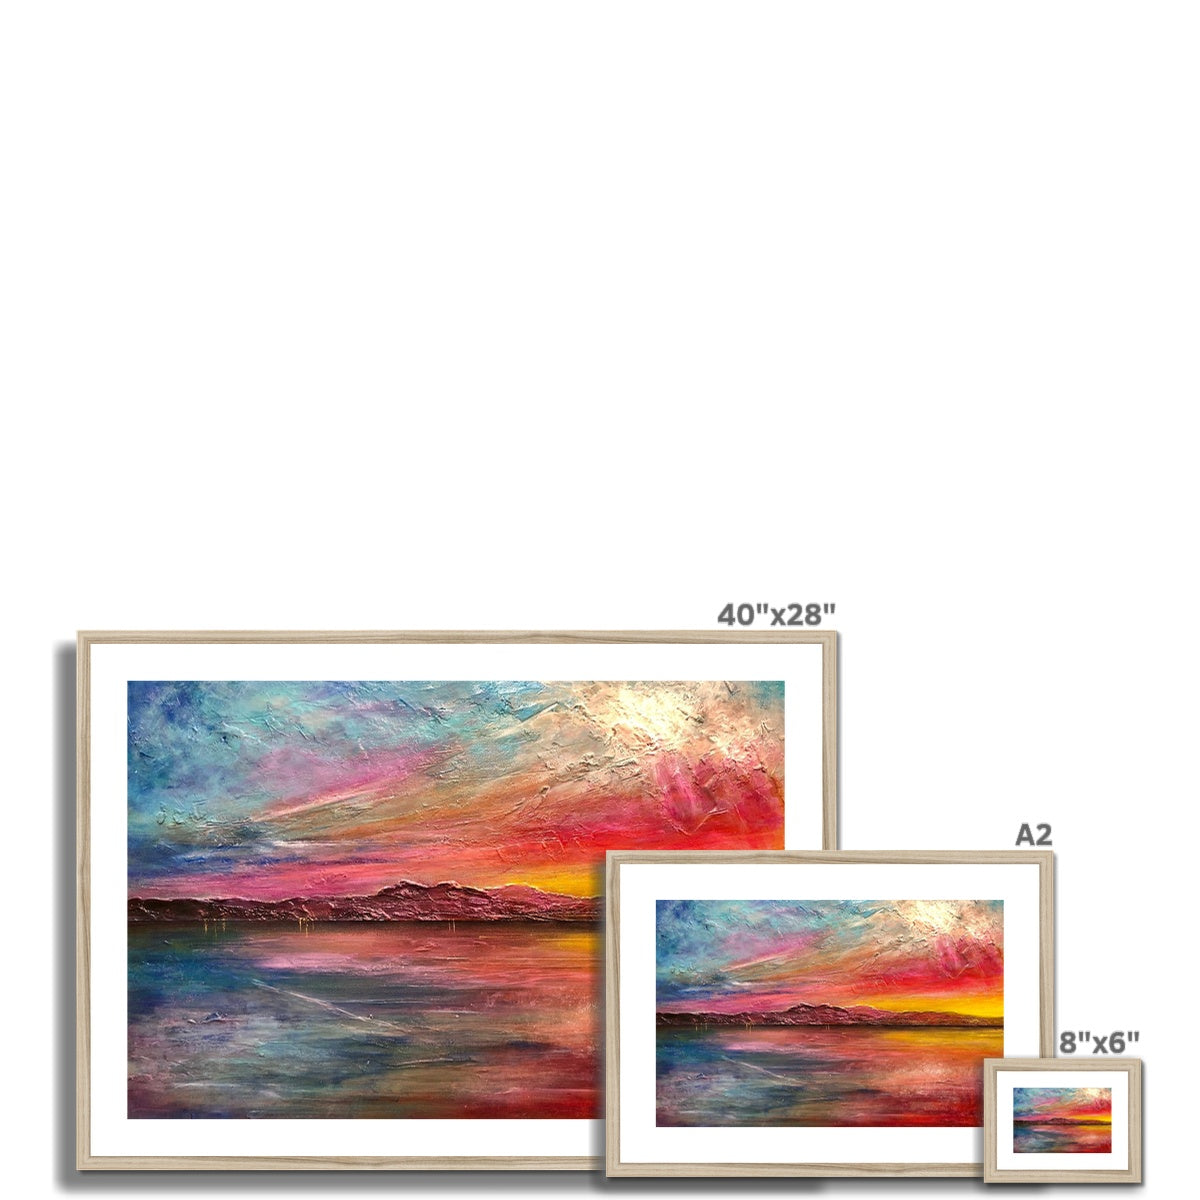 Arran Sunset ii Painting | Framed & Mounted Prints From Scotland-Framed & Mounted Prints-Arran Art Gallery-Paintings, Prints, Homeware, Art Gifts From Scotland By Scottish Artist Kevin Hunter